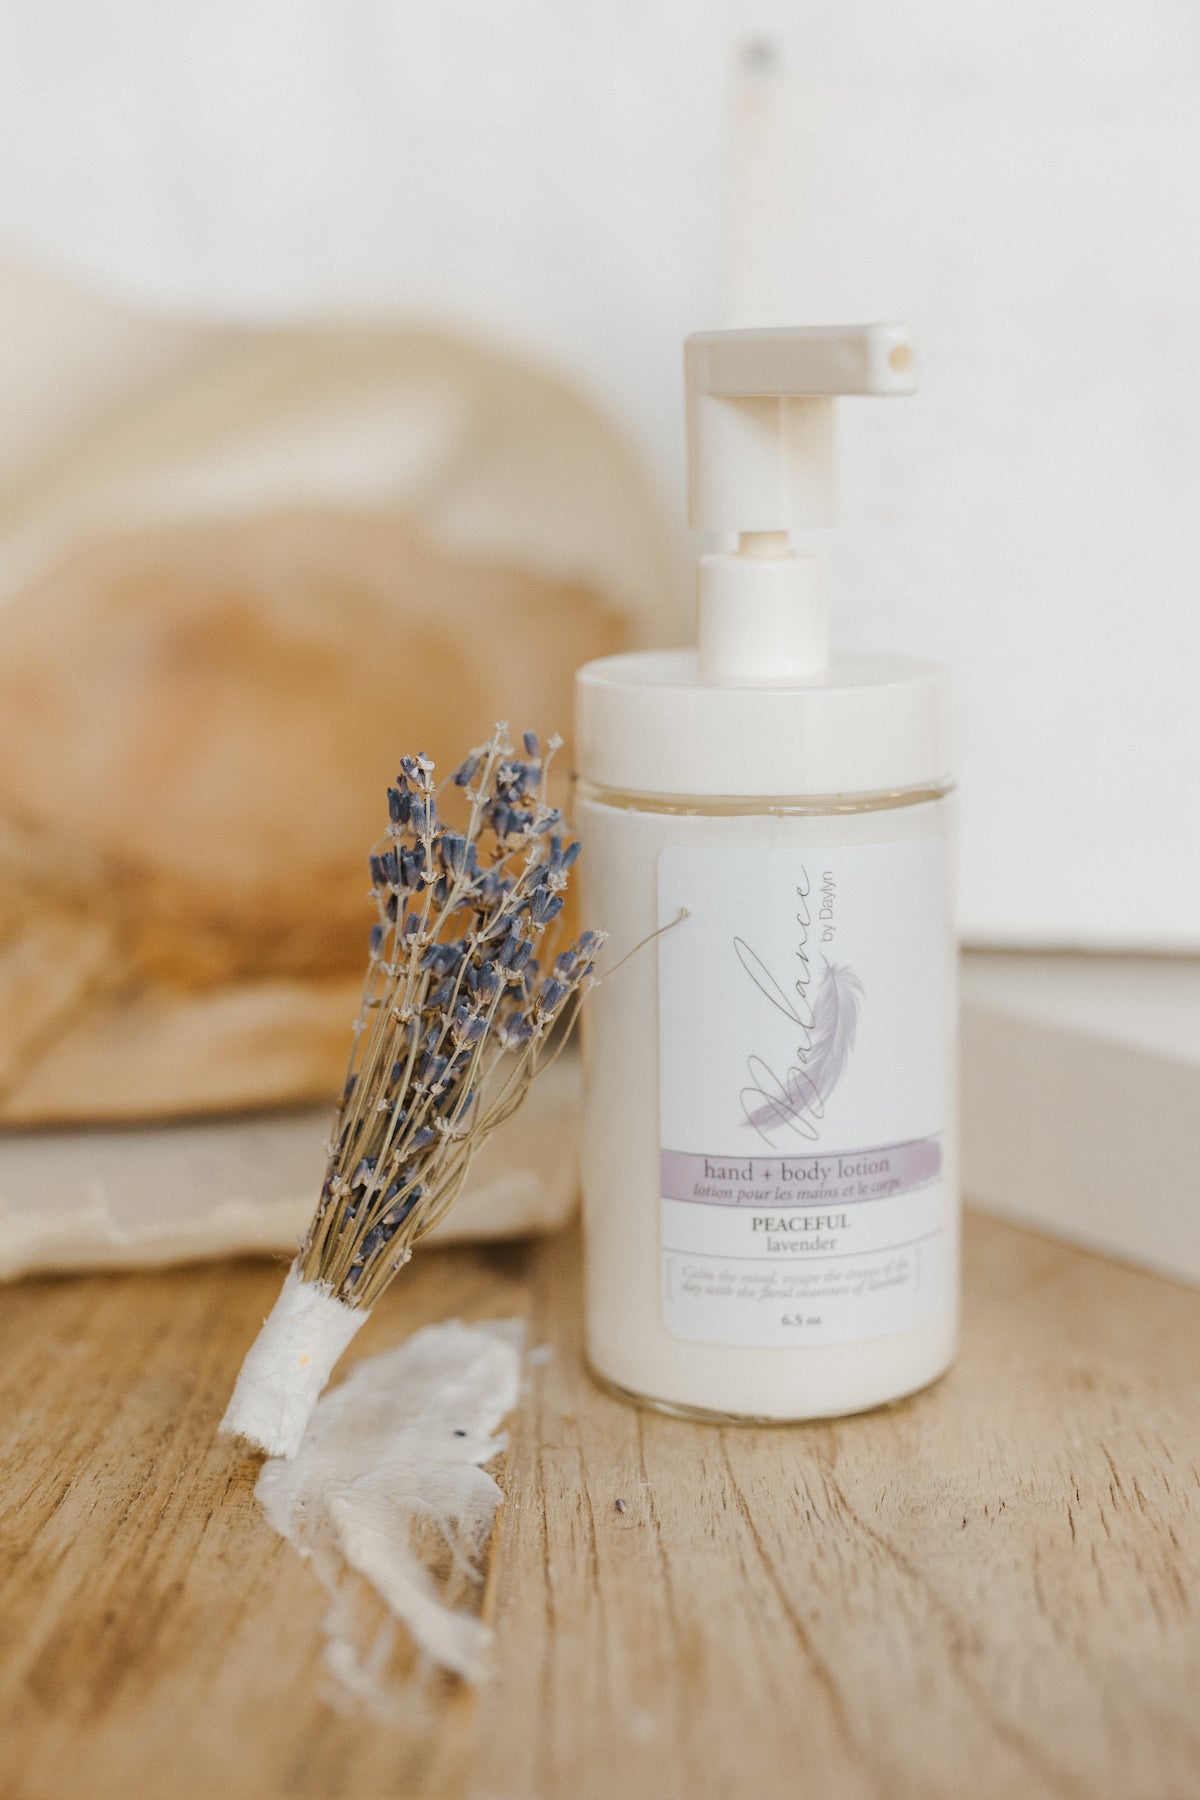 bottle of peaceful lavender hand and body lotion by balance by daylyn with almond oil, shea butter, and more natural ingredients  